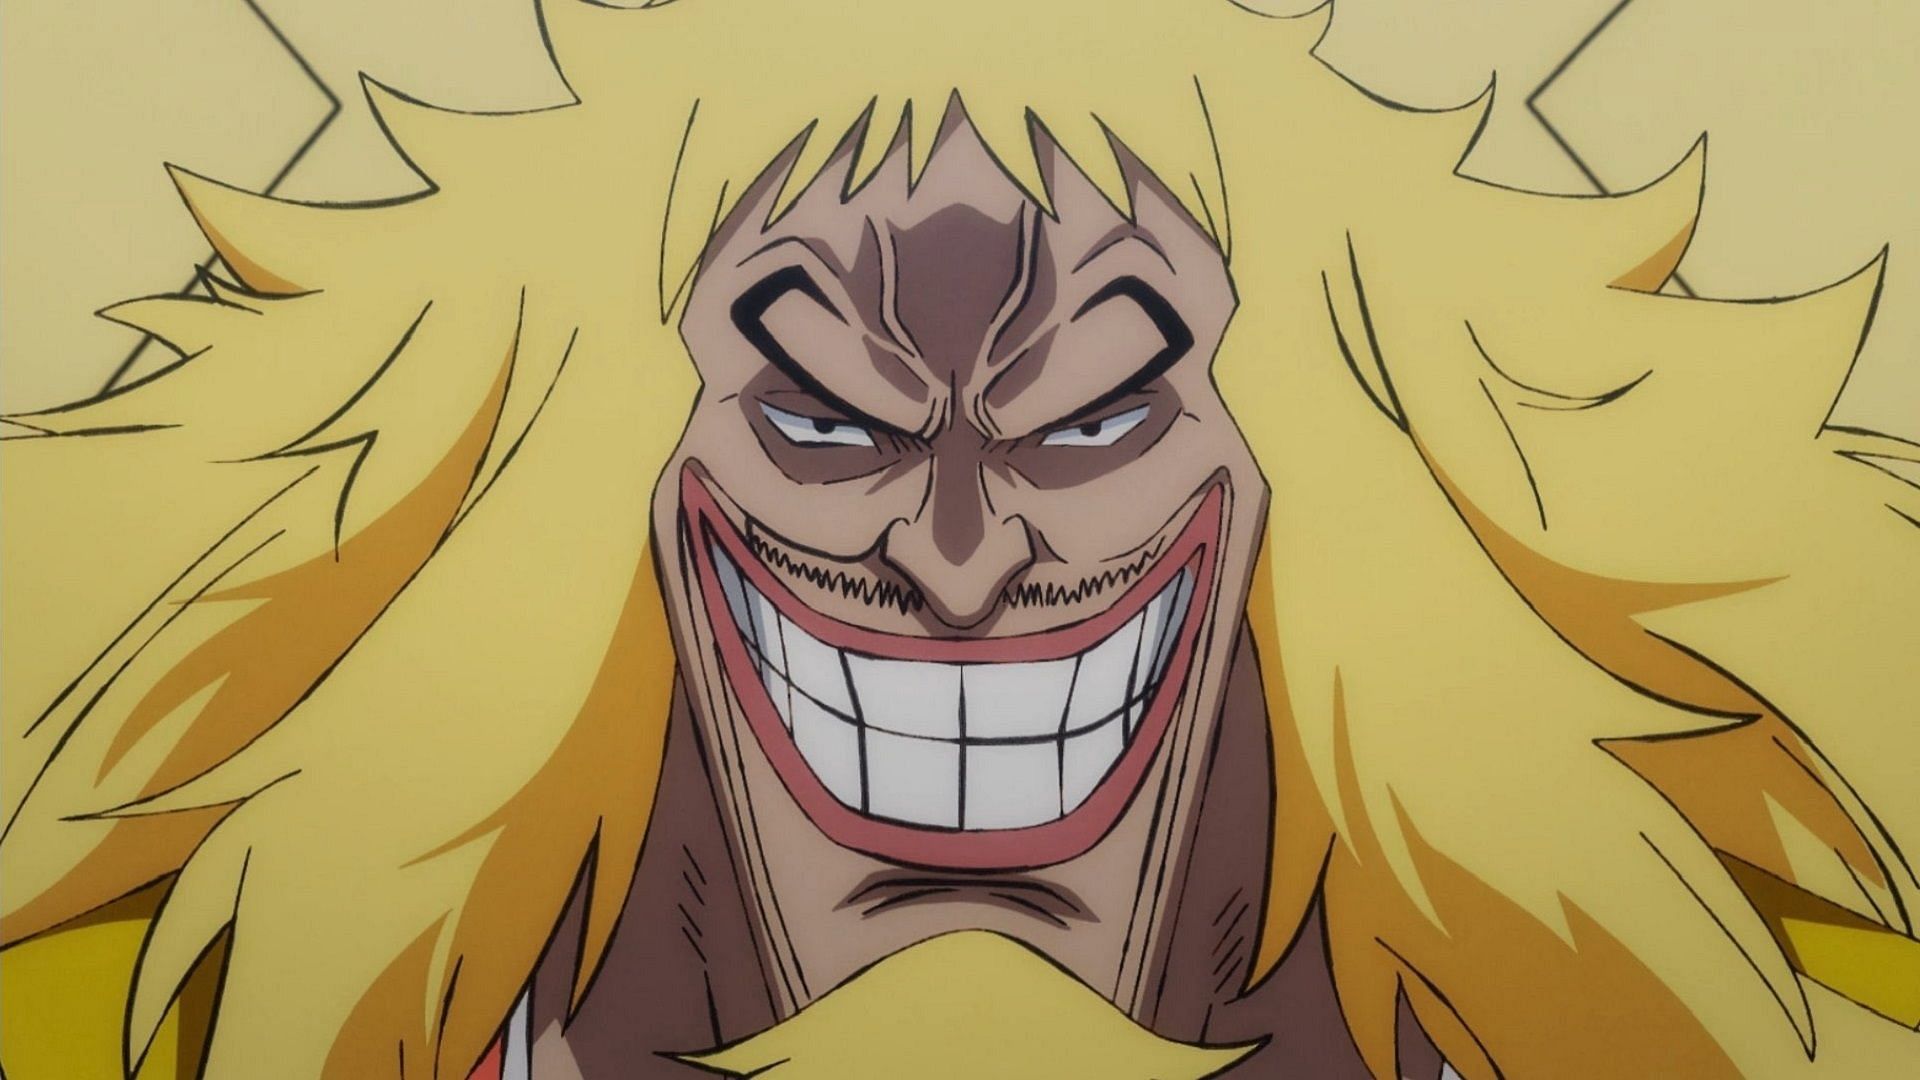 Shiki as seen in the One Piece anime (Image via Toei Animation, One Piece)